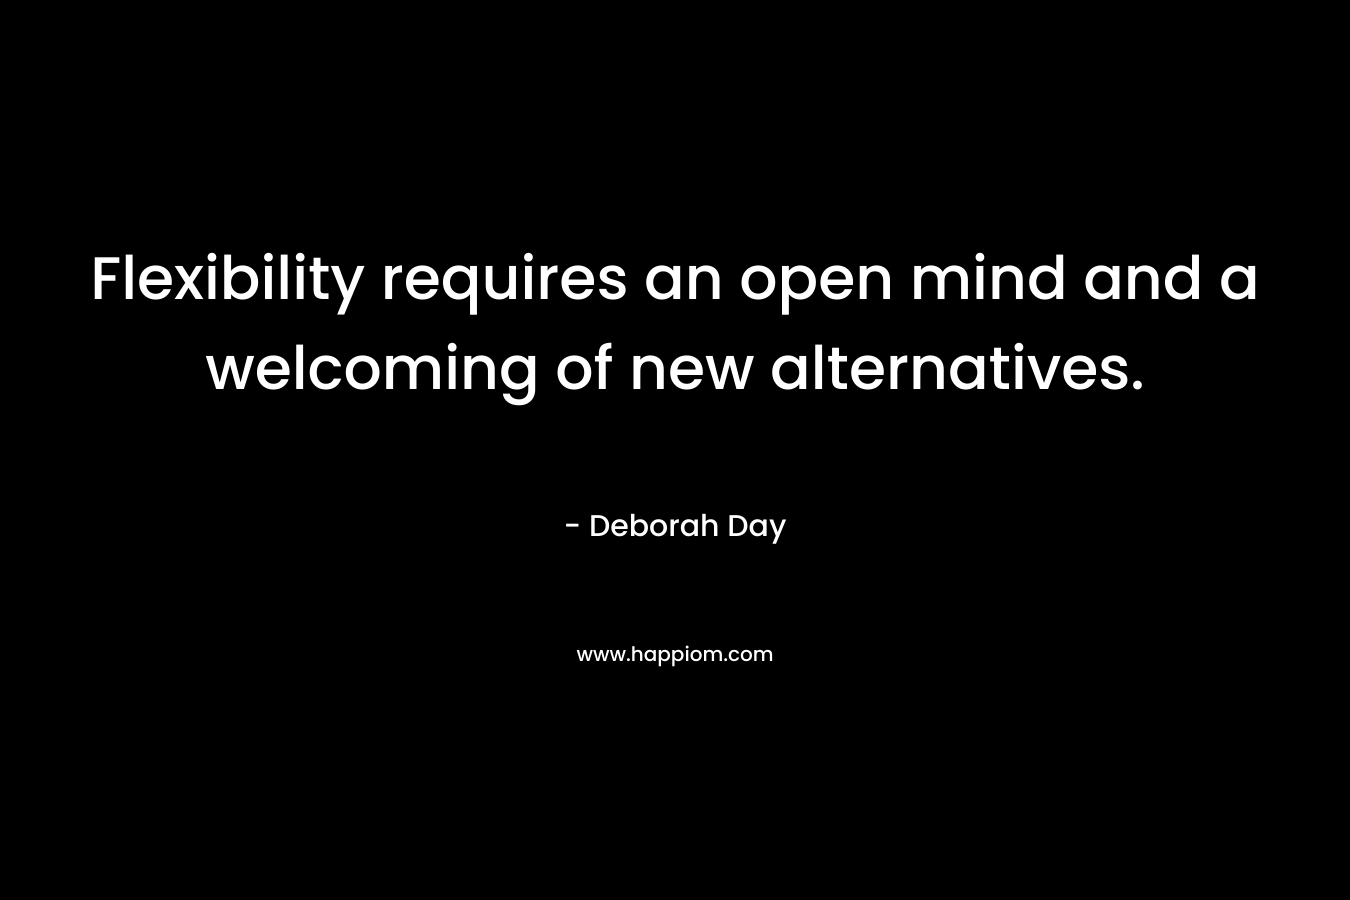 Flexibility requires an open mind and a welcoming of new alternatives. – Deborah Day